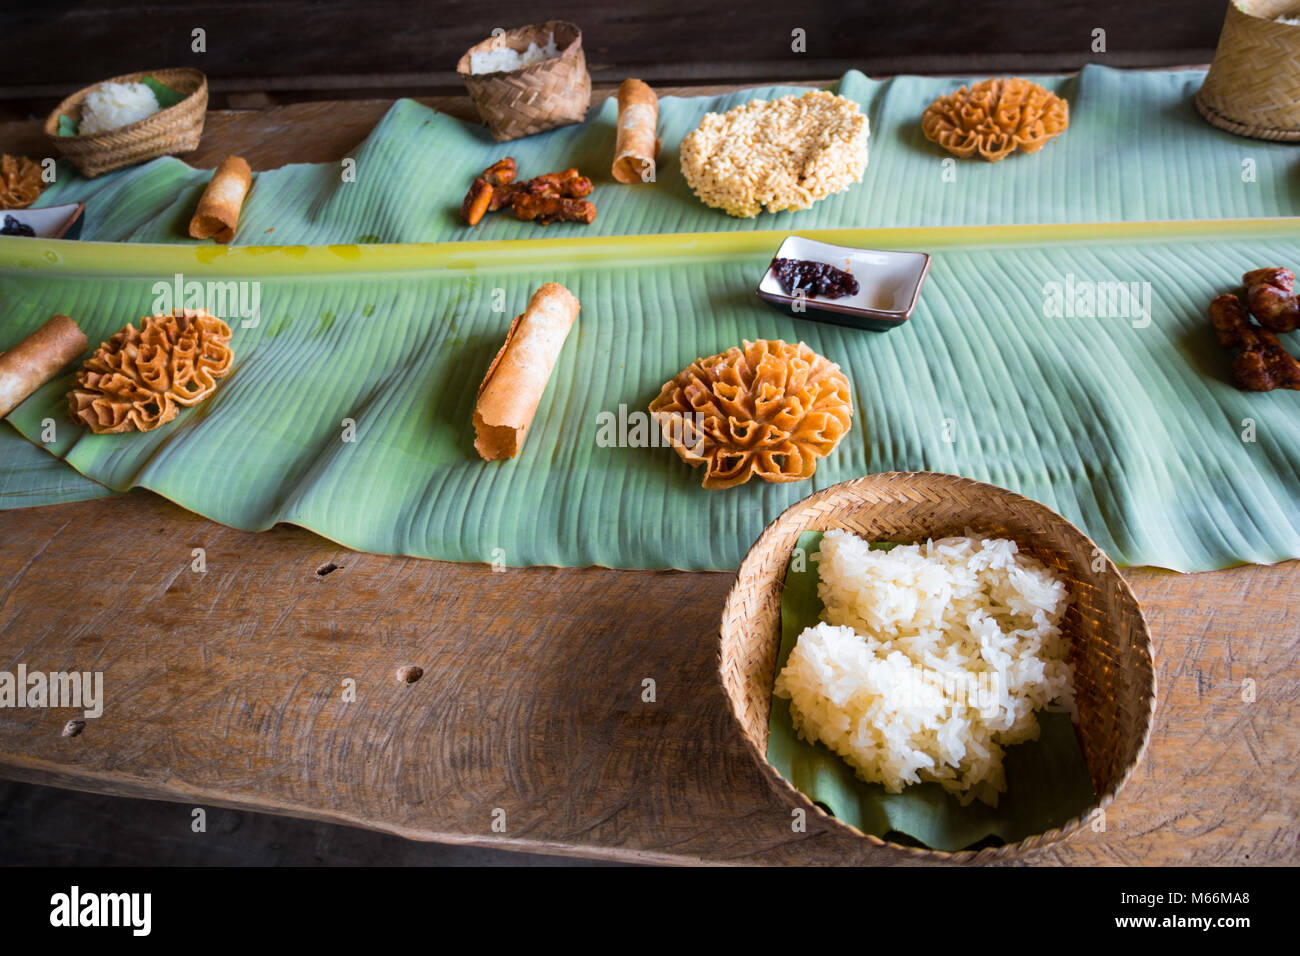 The Laotian Sticky Rice (called “khao niaow”) prepared in many delicious ways. At the living land farm in Luang Prabang, Laos. Stock Photo